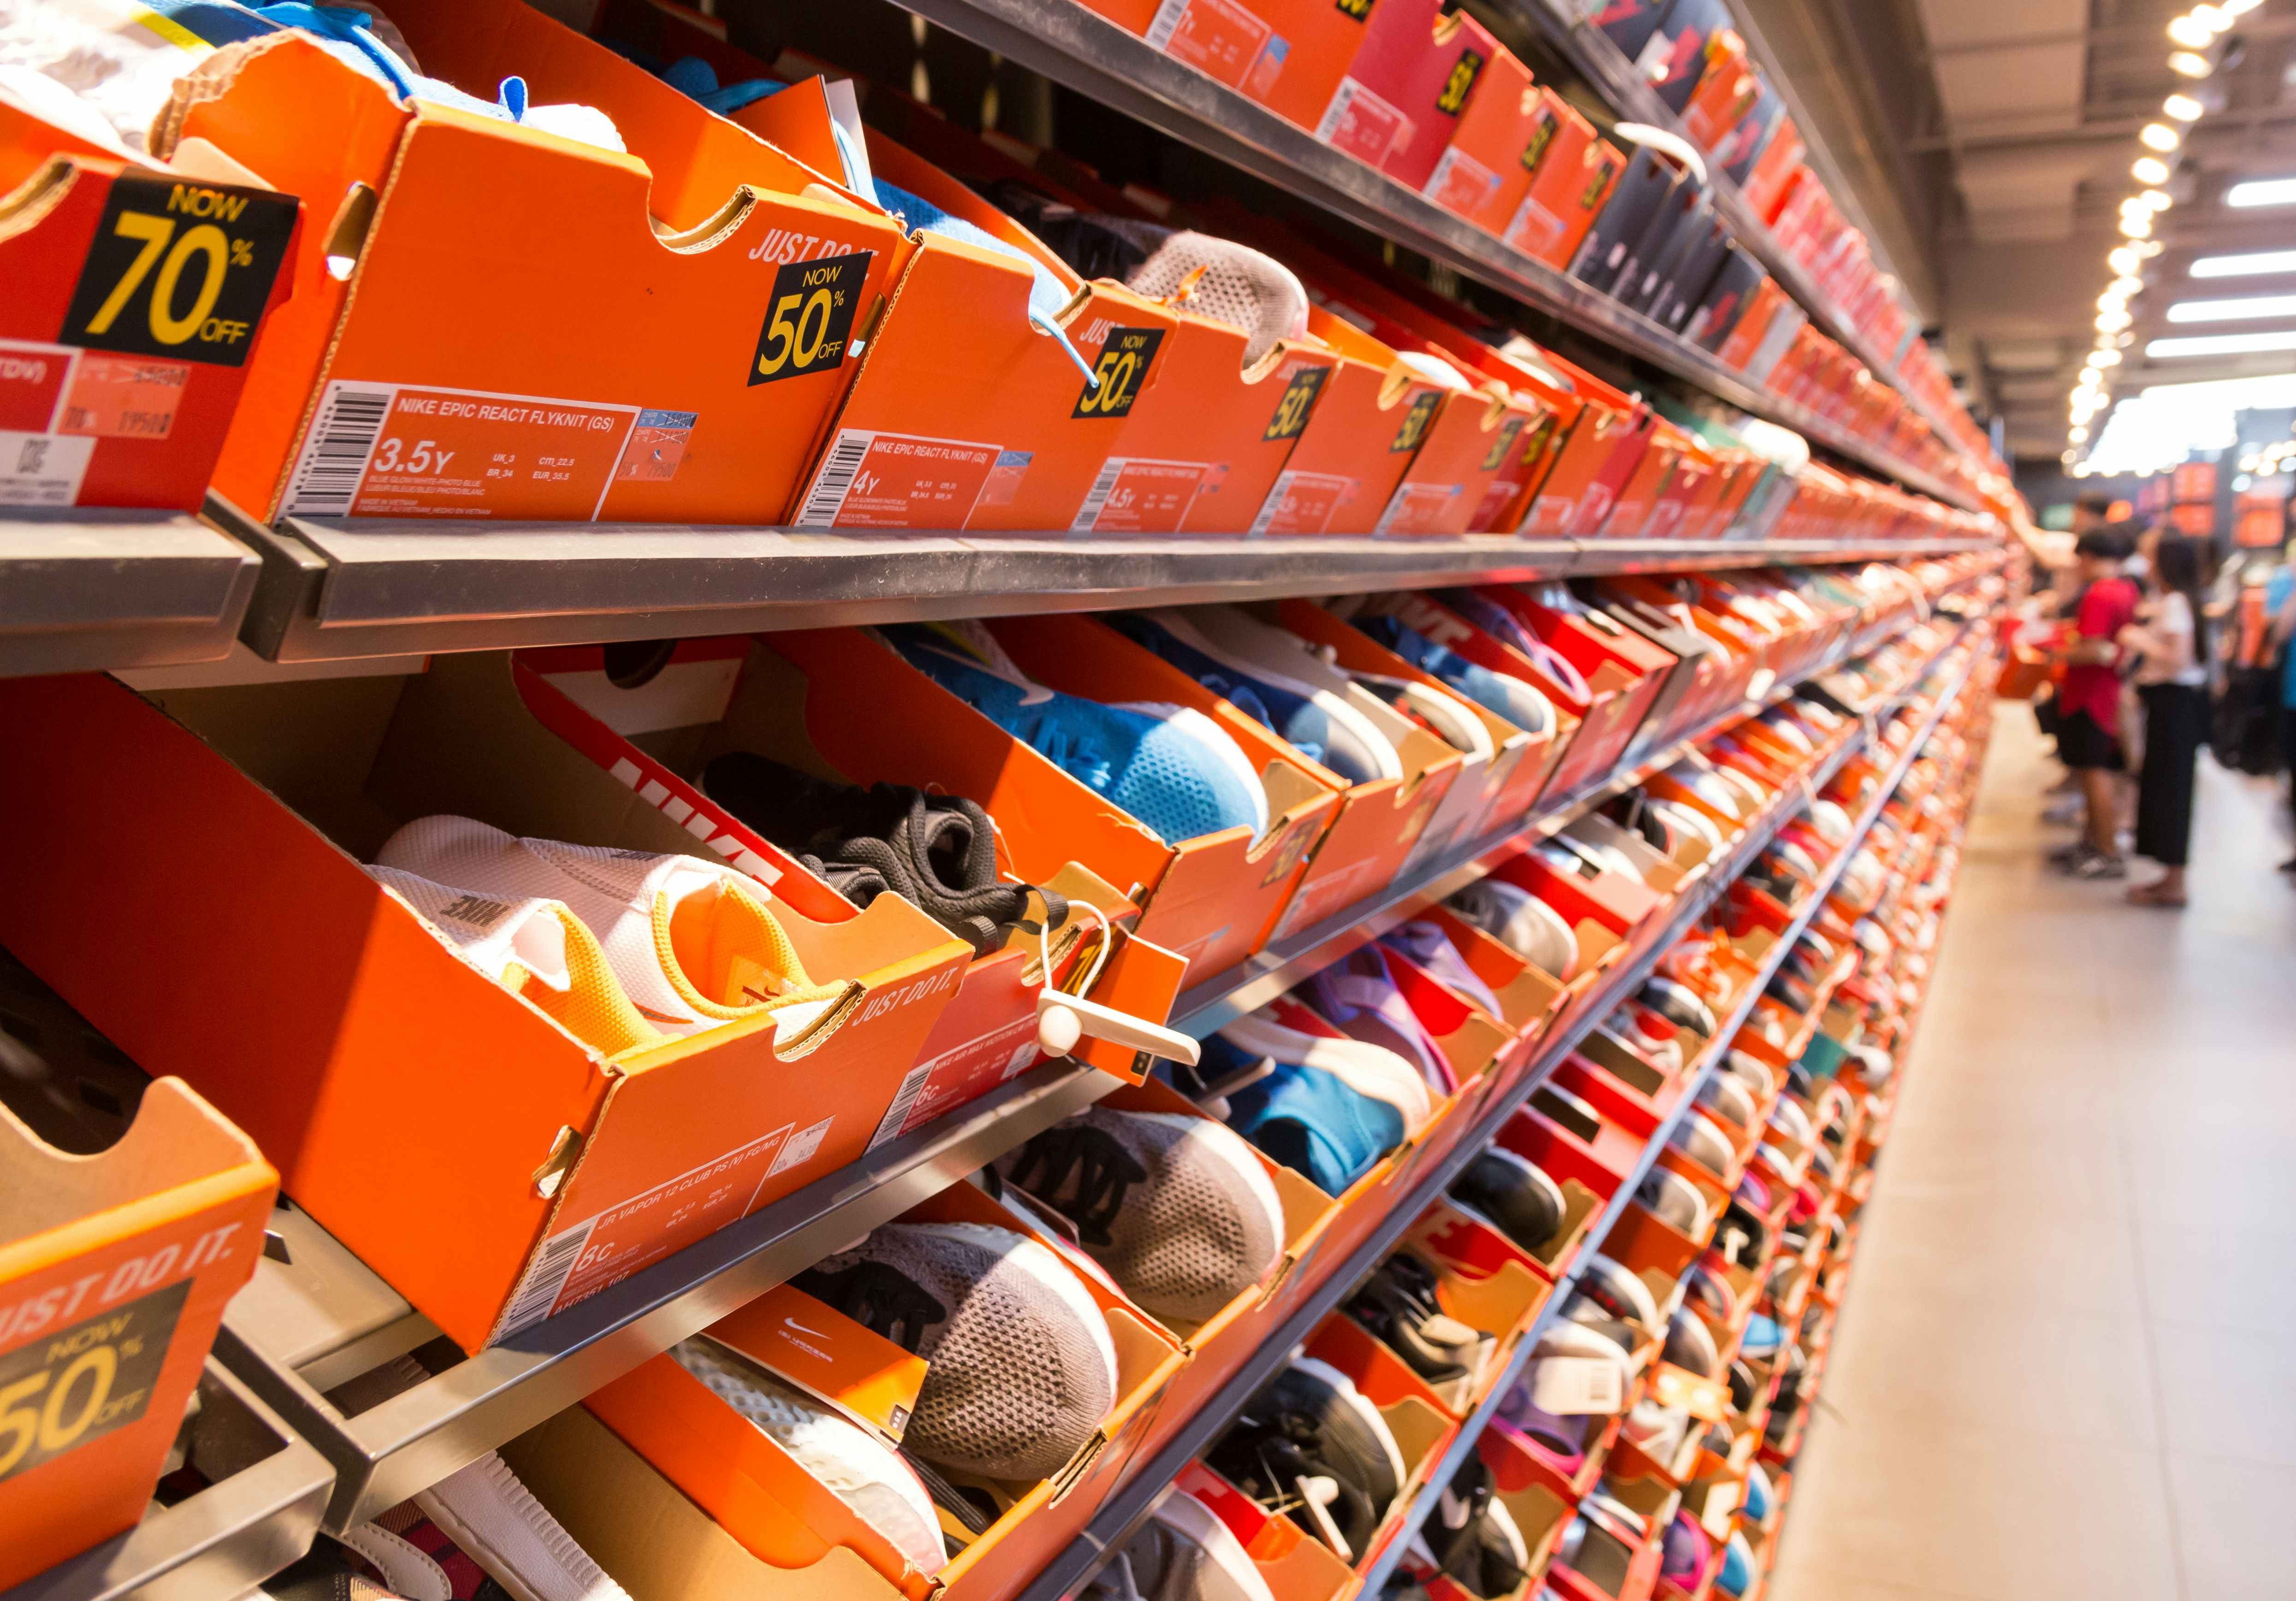 A wall of shoes in orange shoe boxes in the clearance section of a Nike Factory Store.